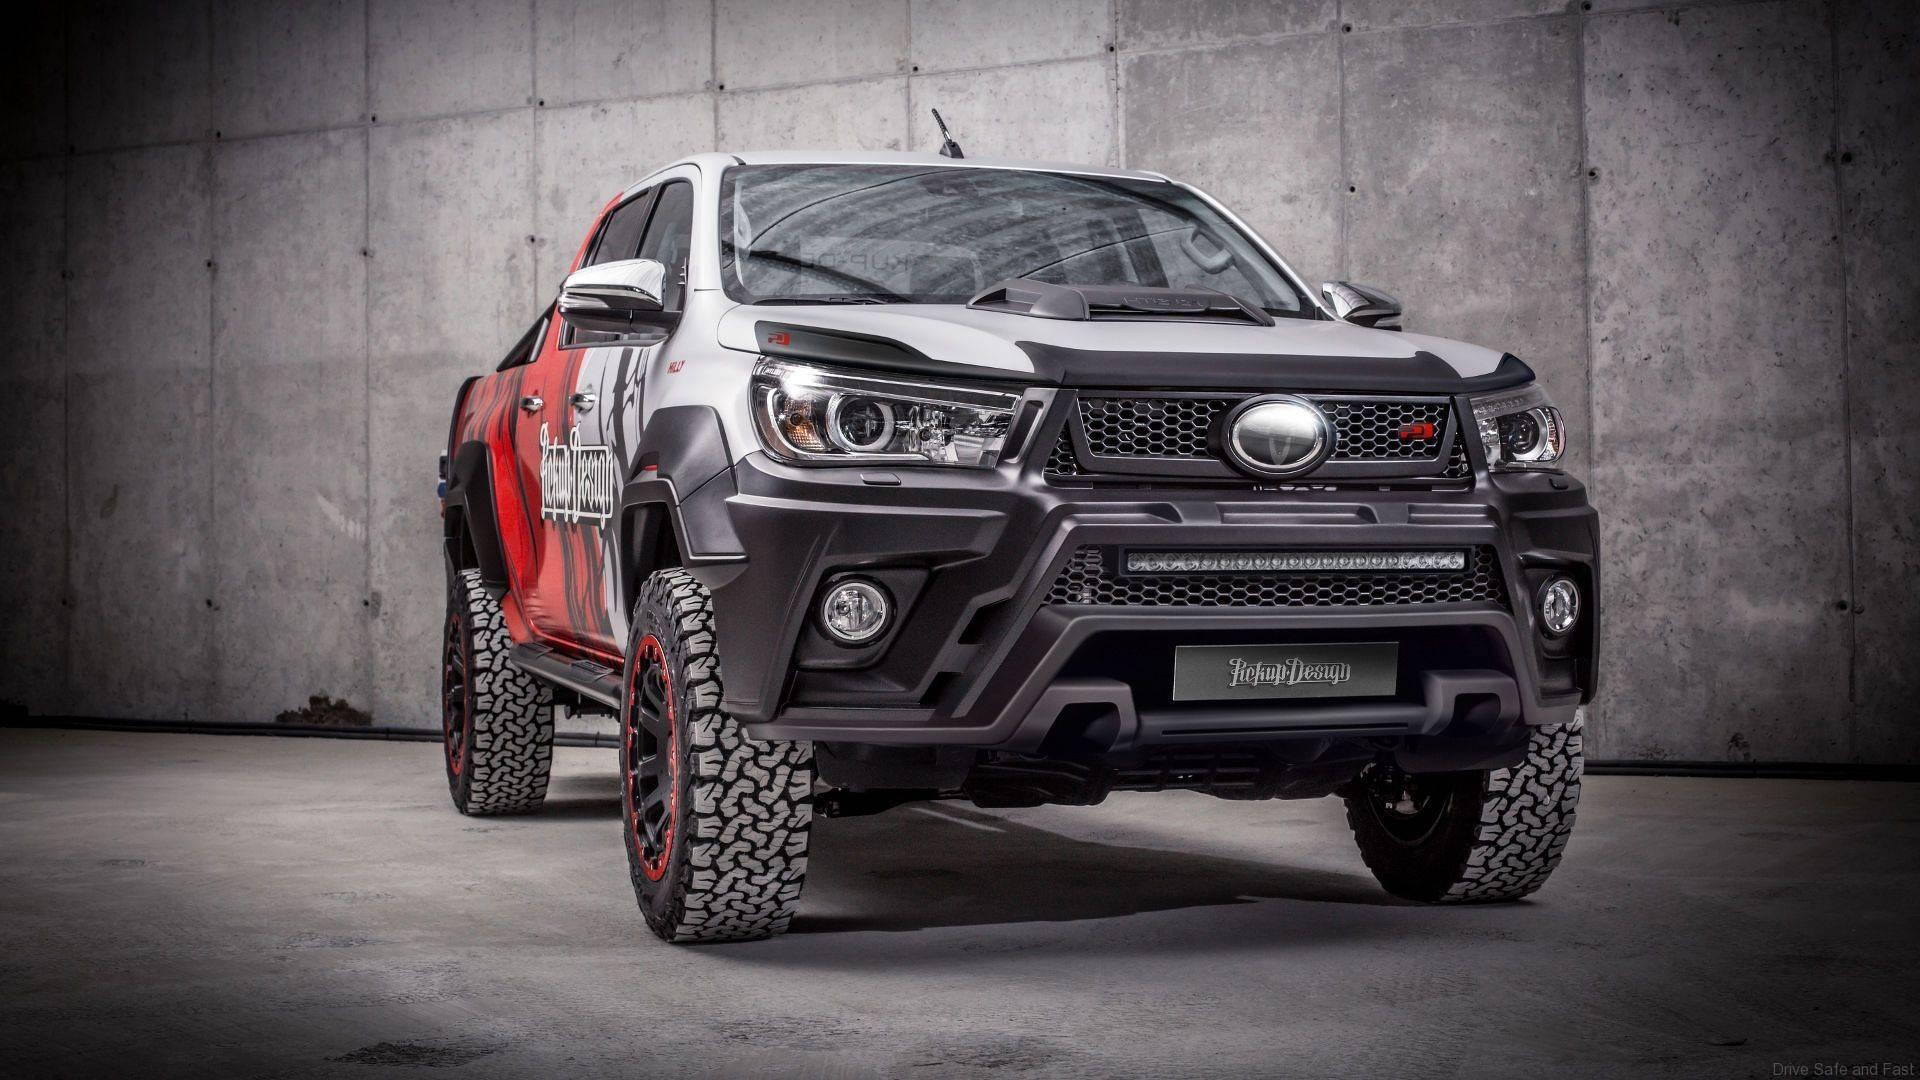  Carlex offers a tuning idea for your Toyota Hilux DSF my